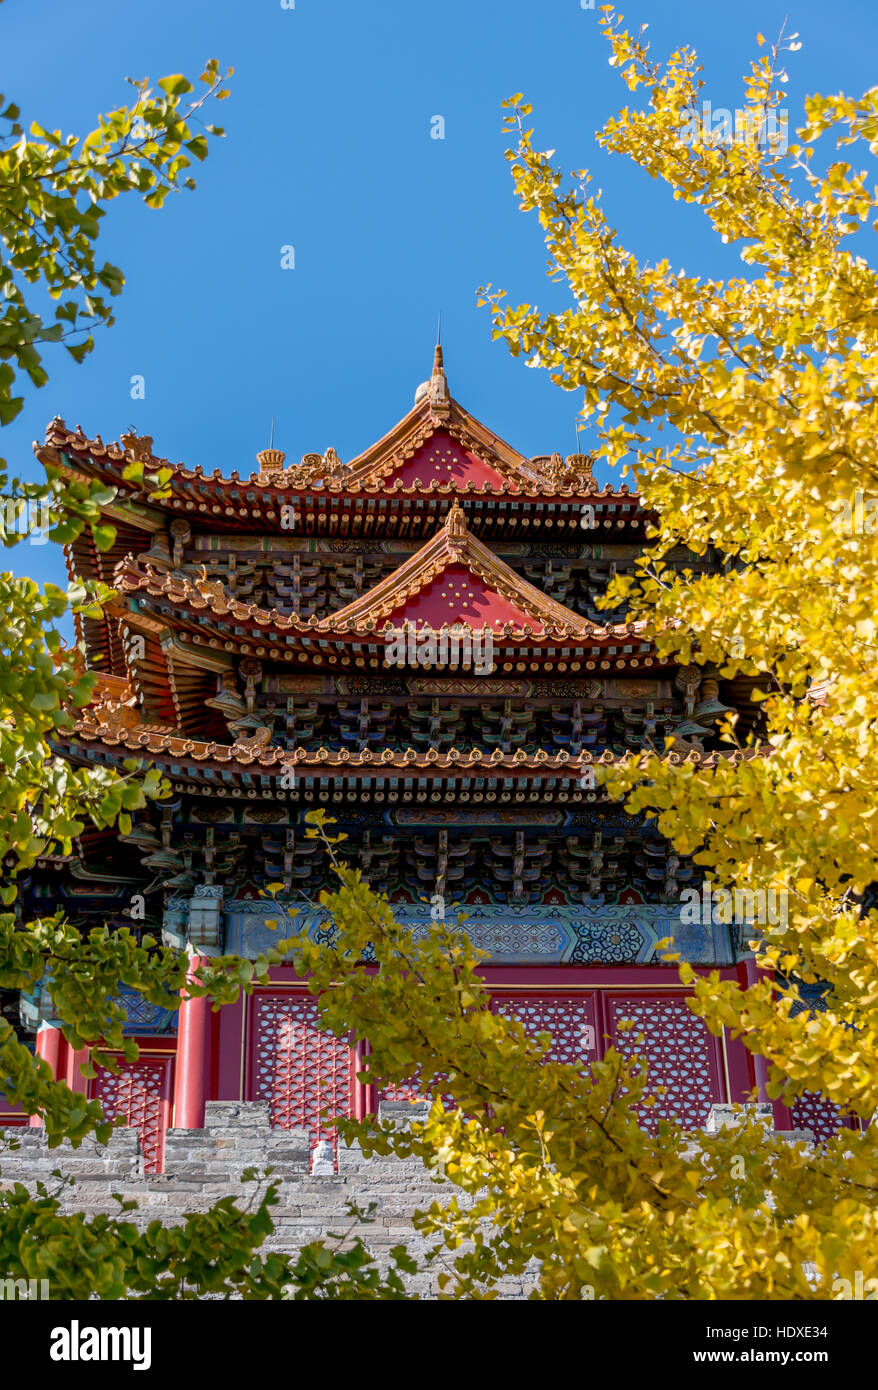 Forbidden City in autumn with colorful fall yellow leaves framing corner tower, Beijing, China Stock Photo